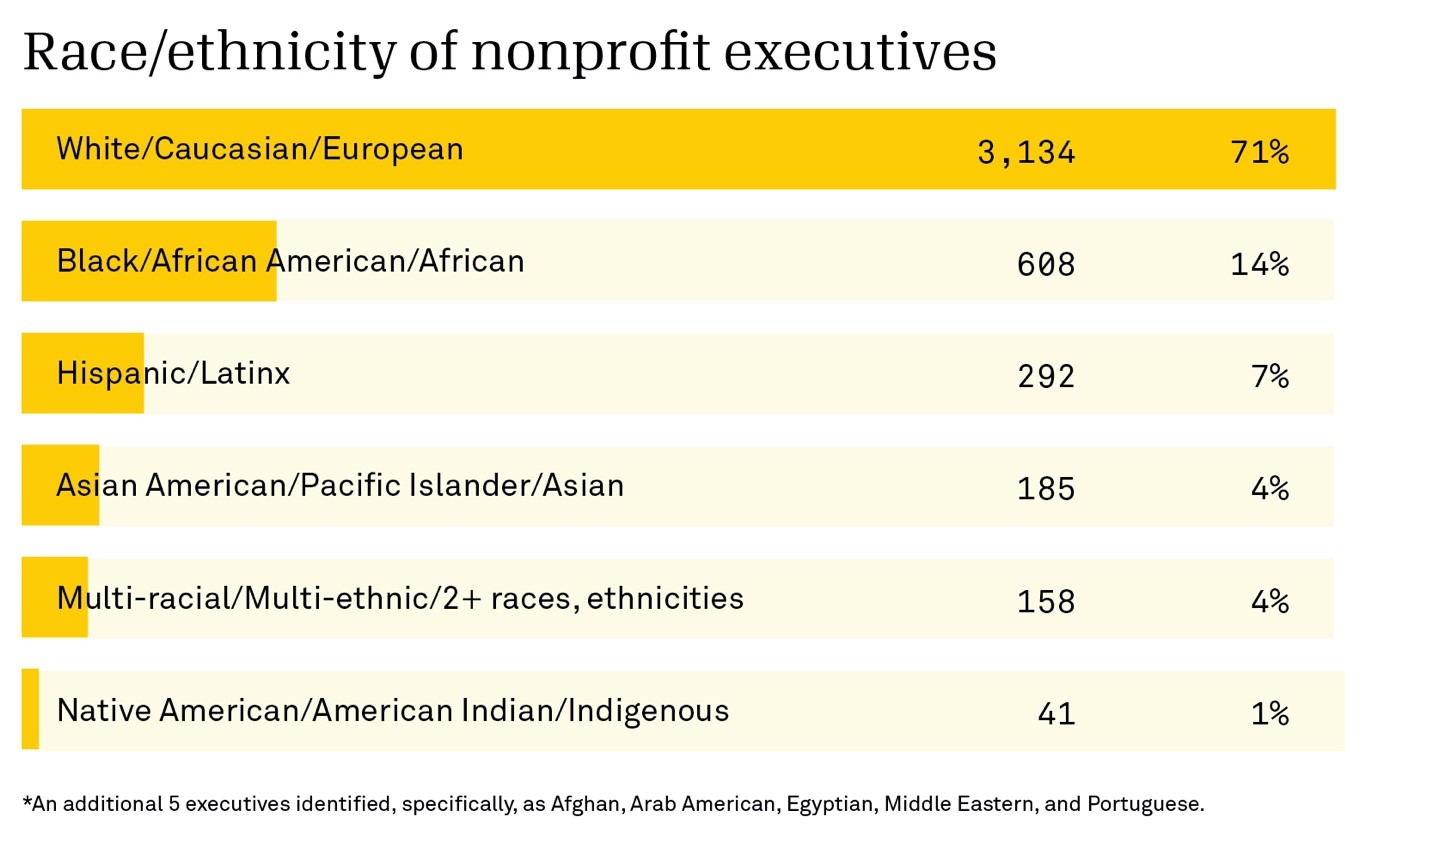 Table showing race/ethnicity of nonprofit executives